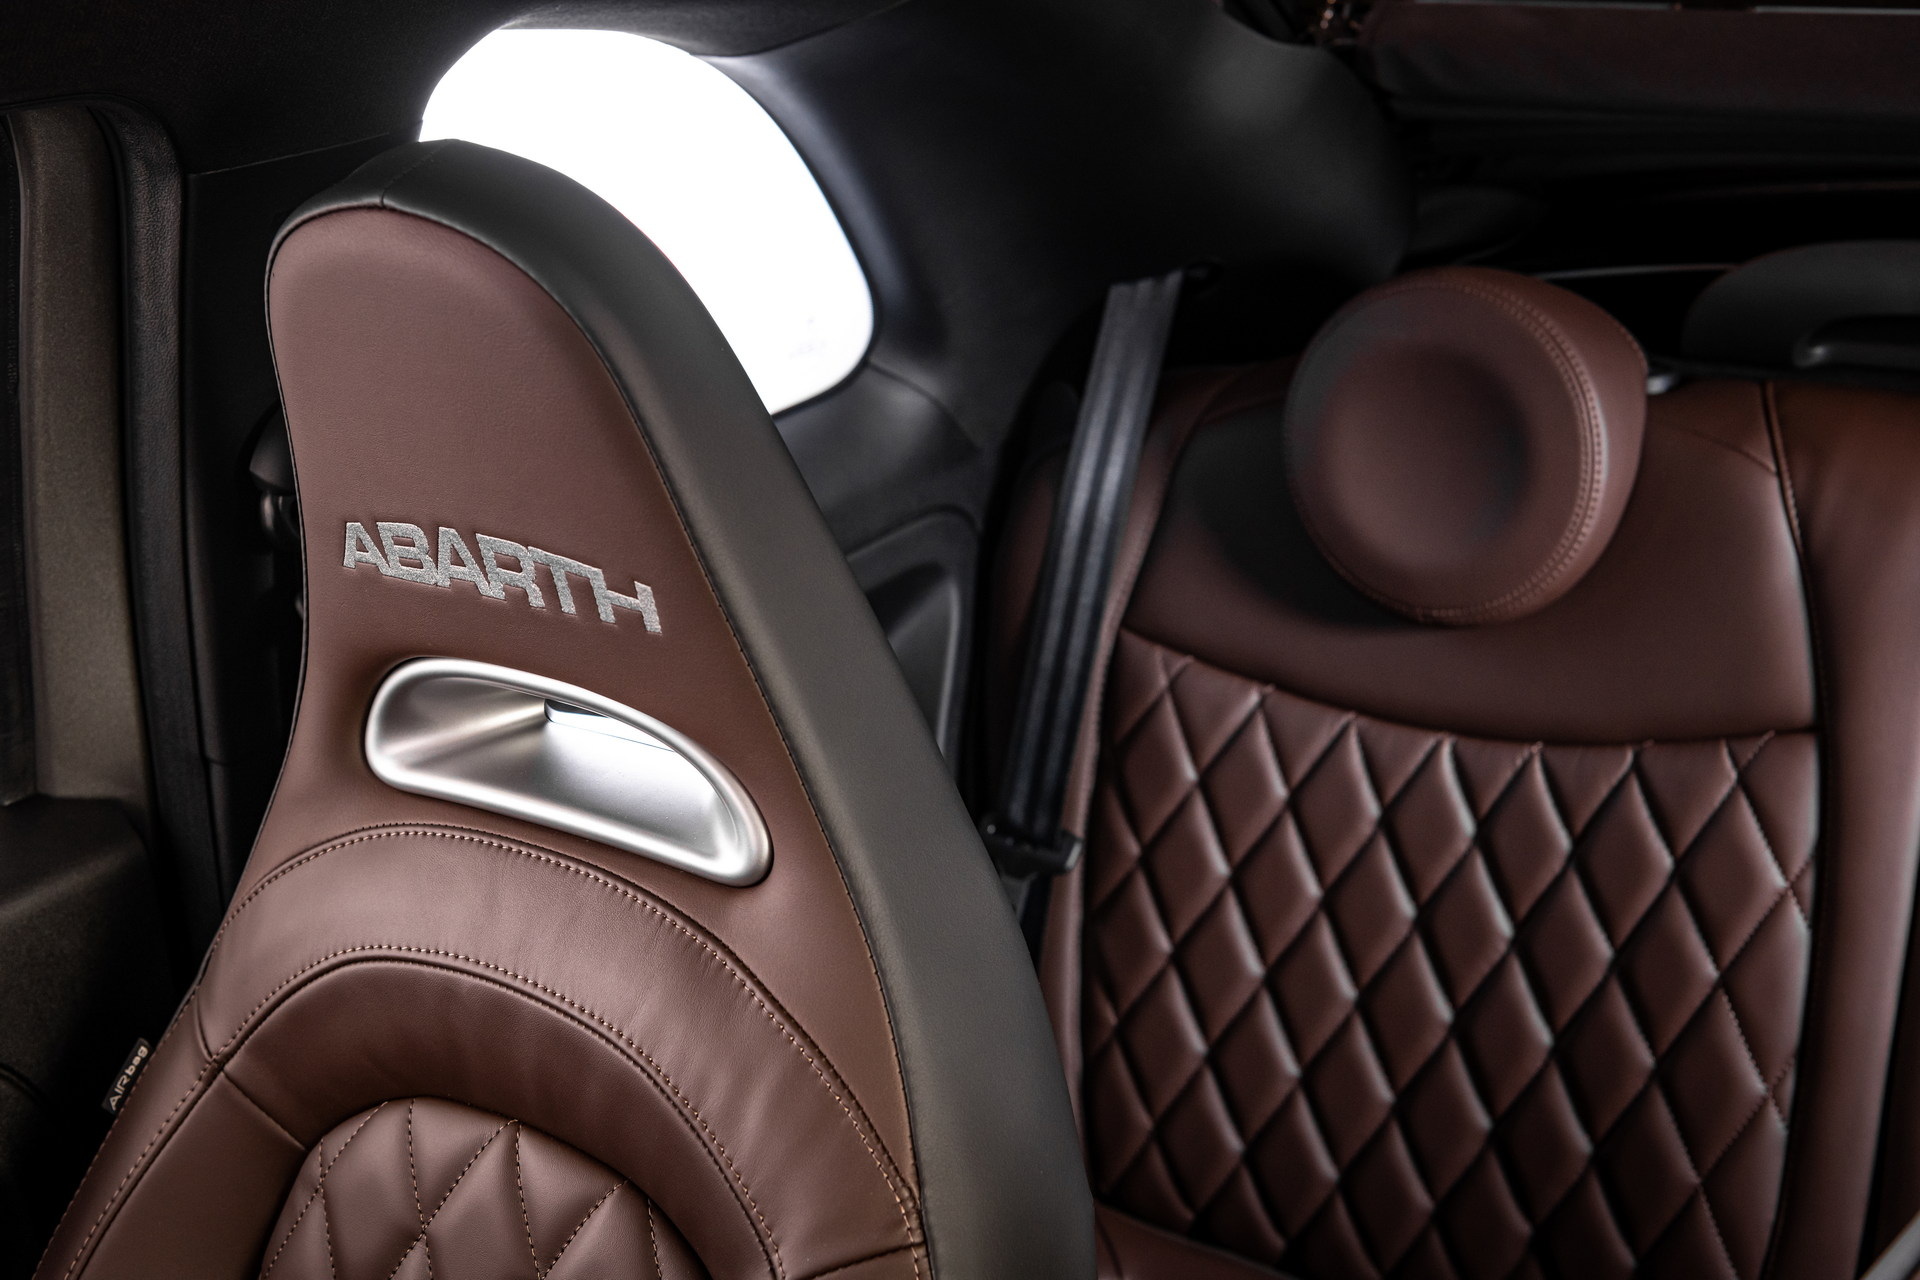 2022 Abarth 695 Turismo Interior Seats Wallpapers #16 of 16